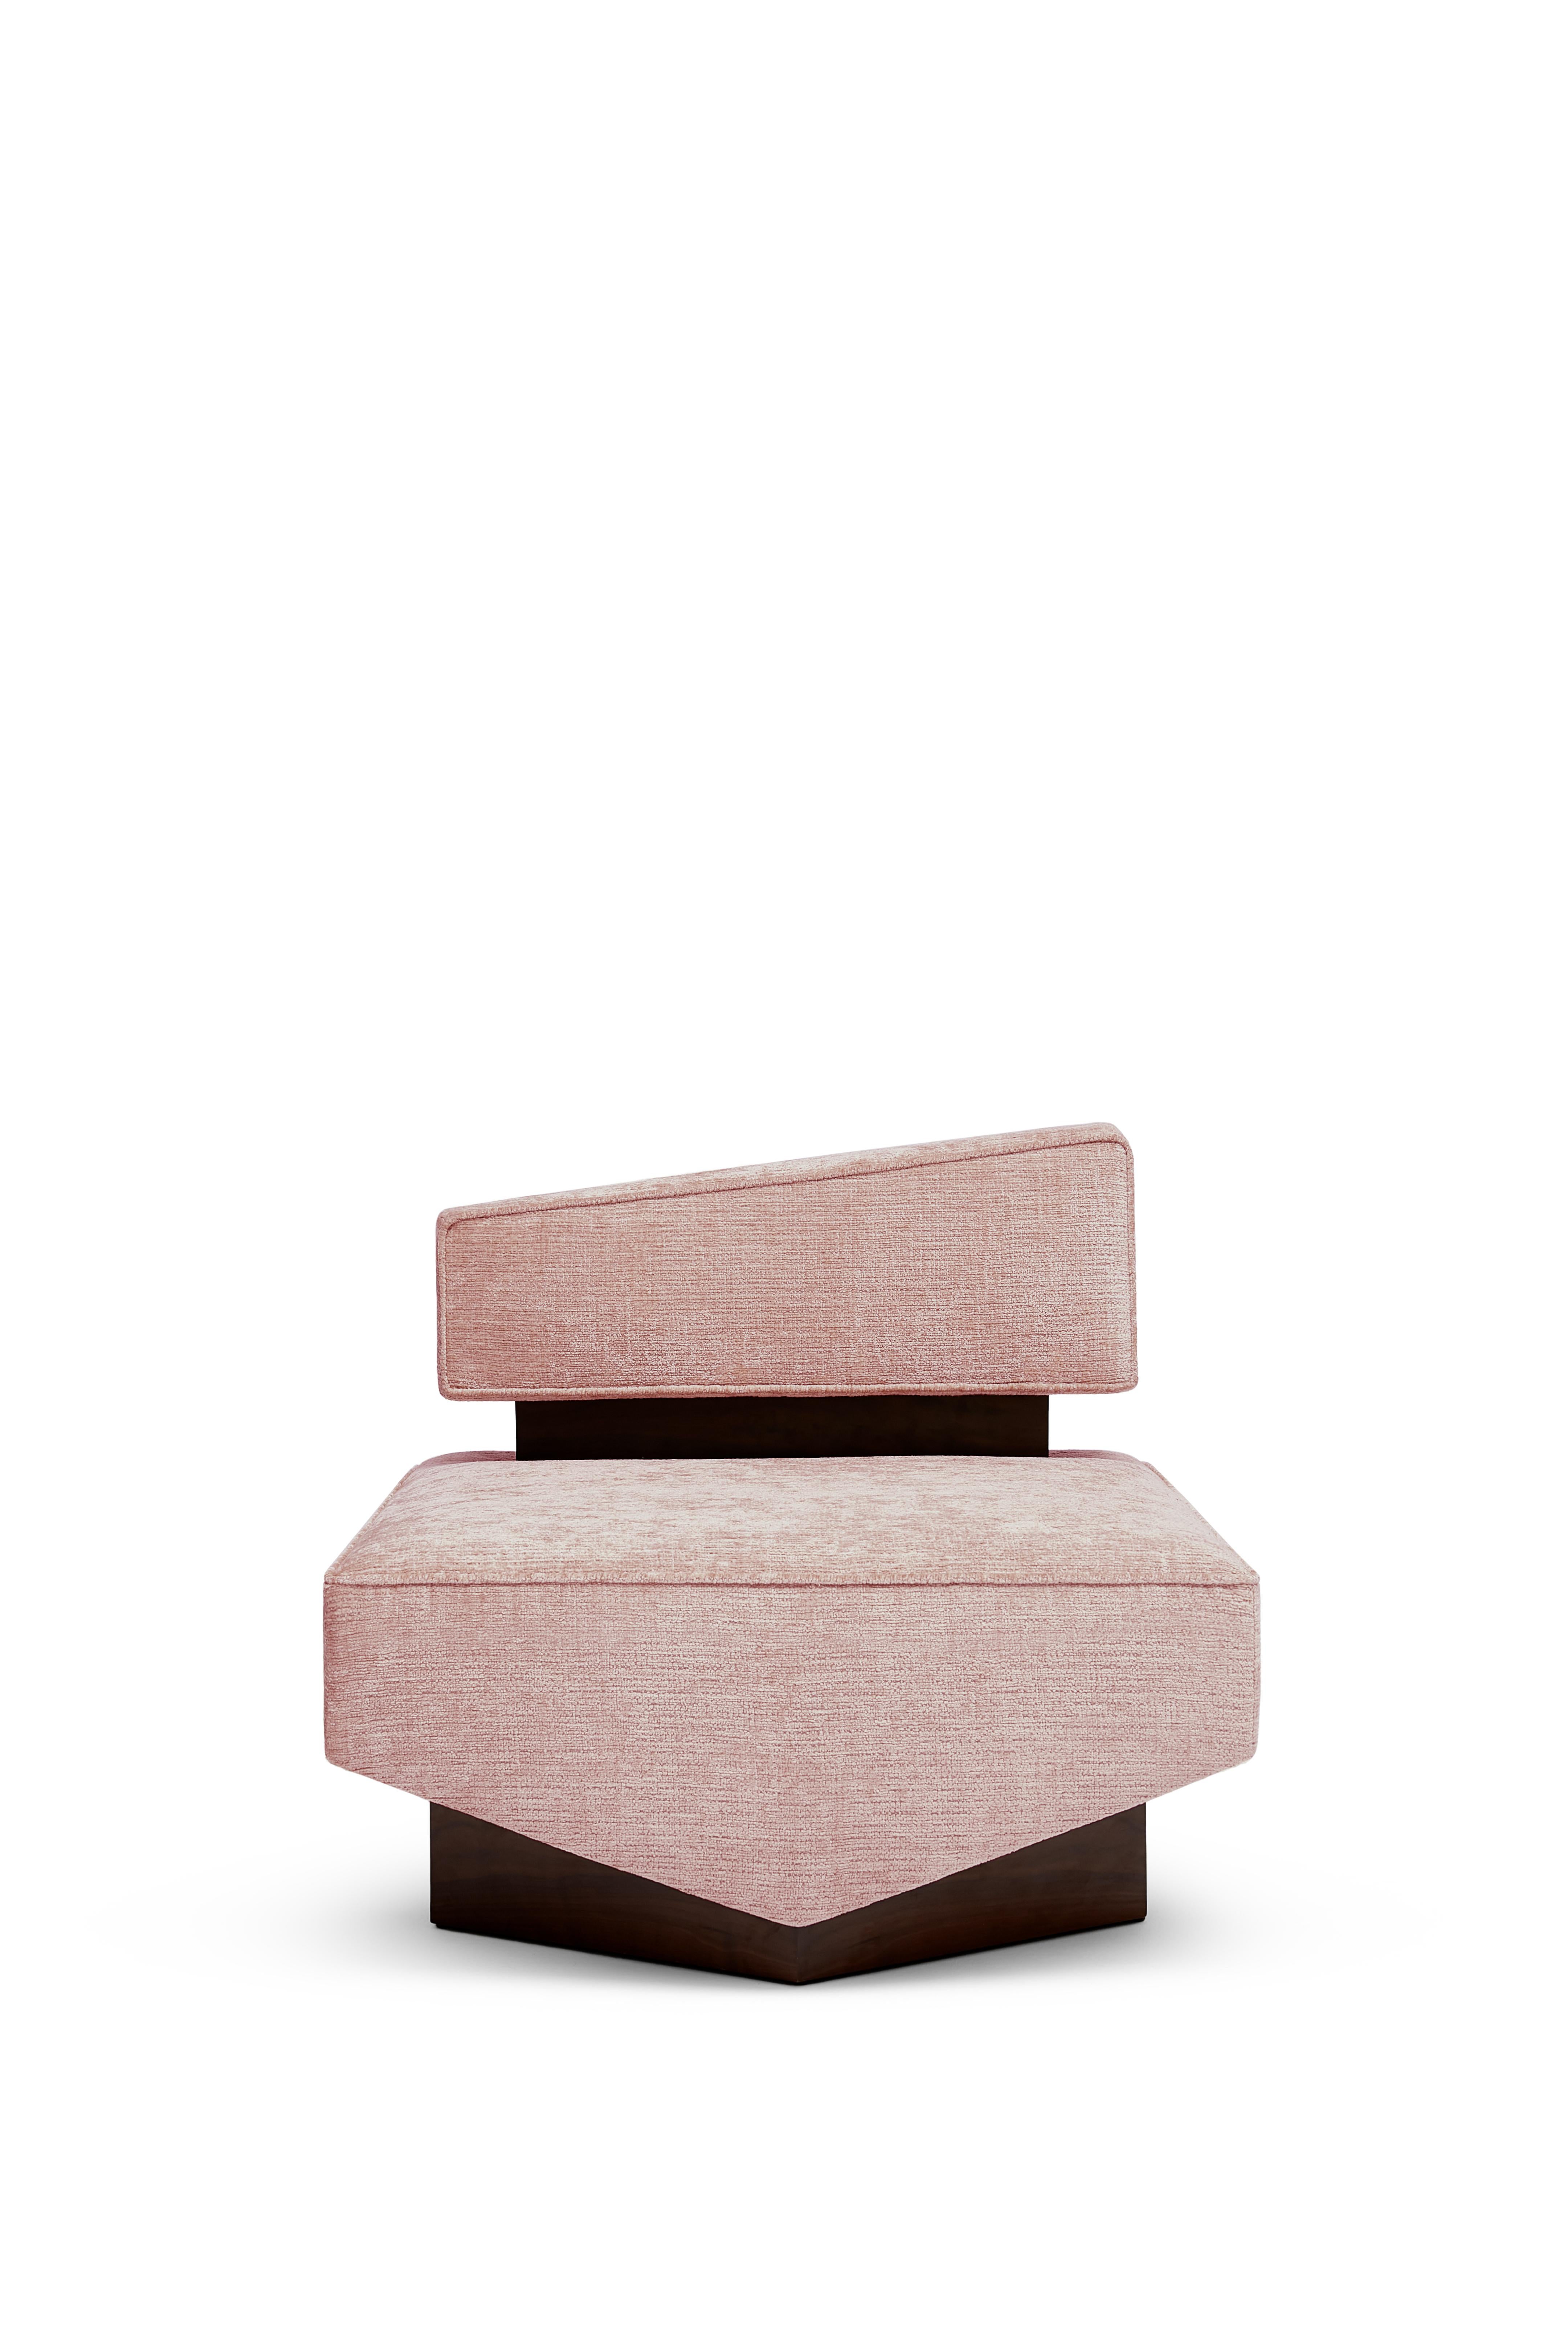 Wool Contemporary Armchair 'Divergent' by Marta Delgado, Walnut, Pink For Sale